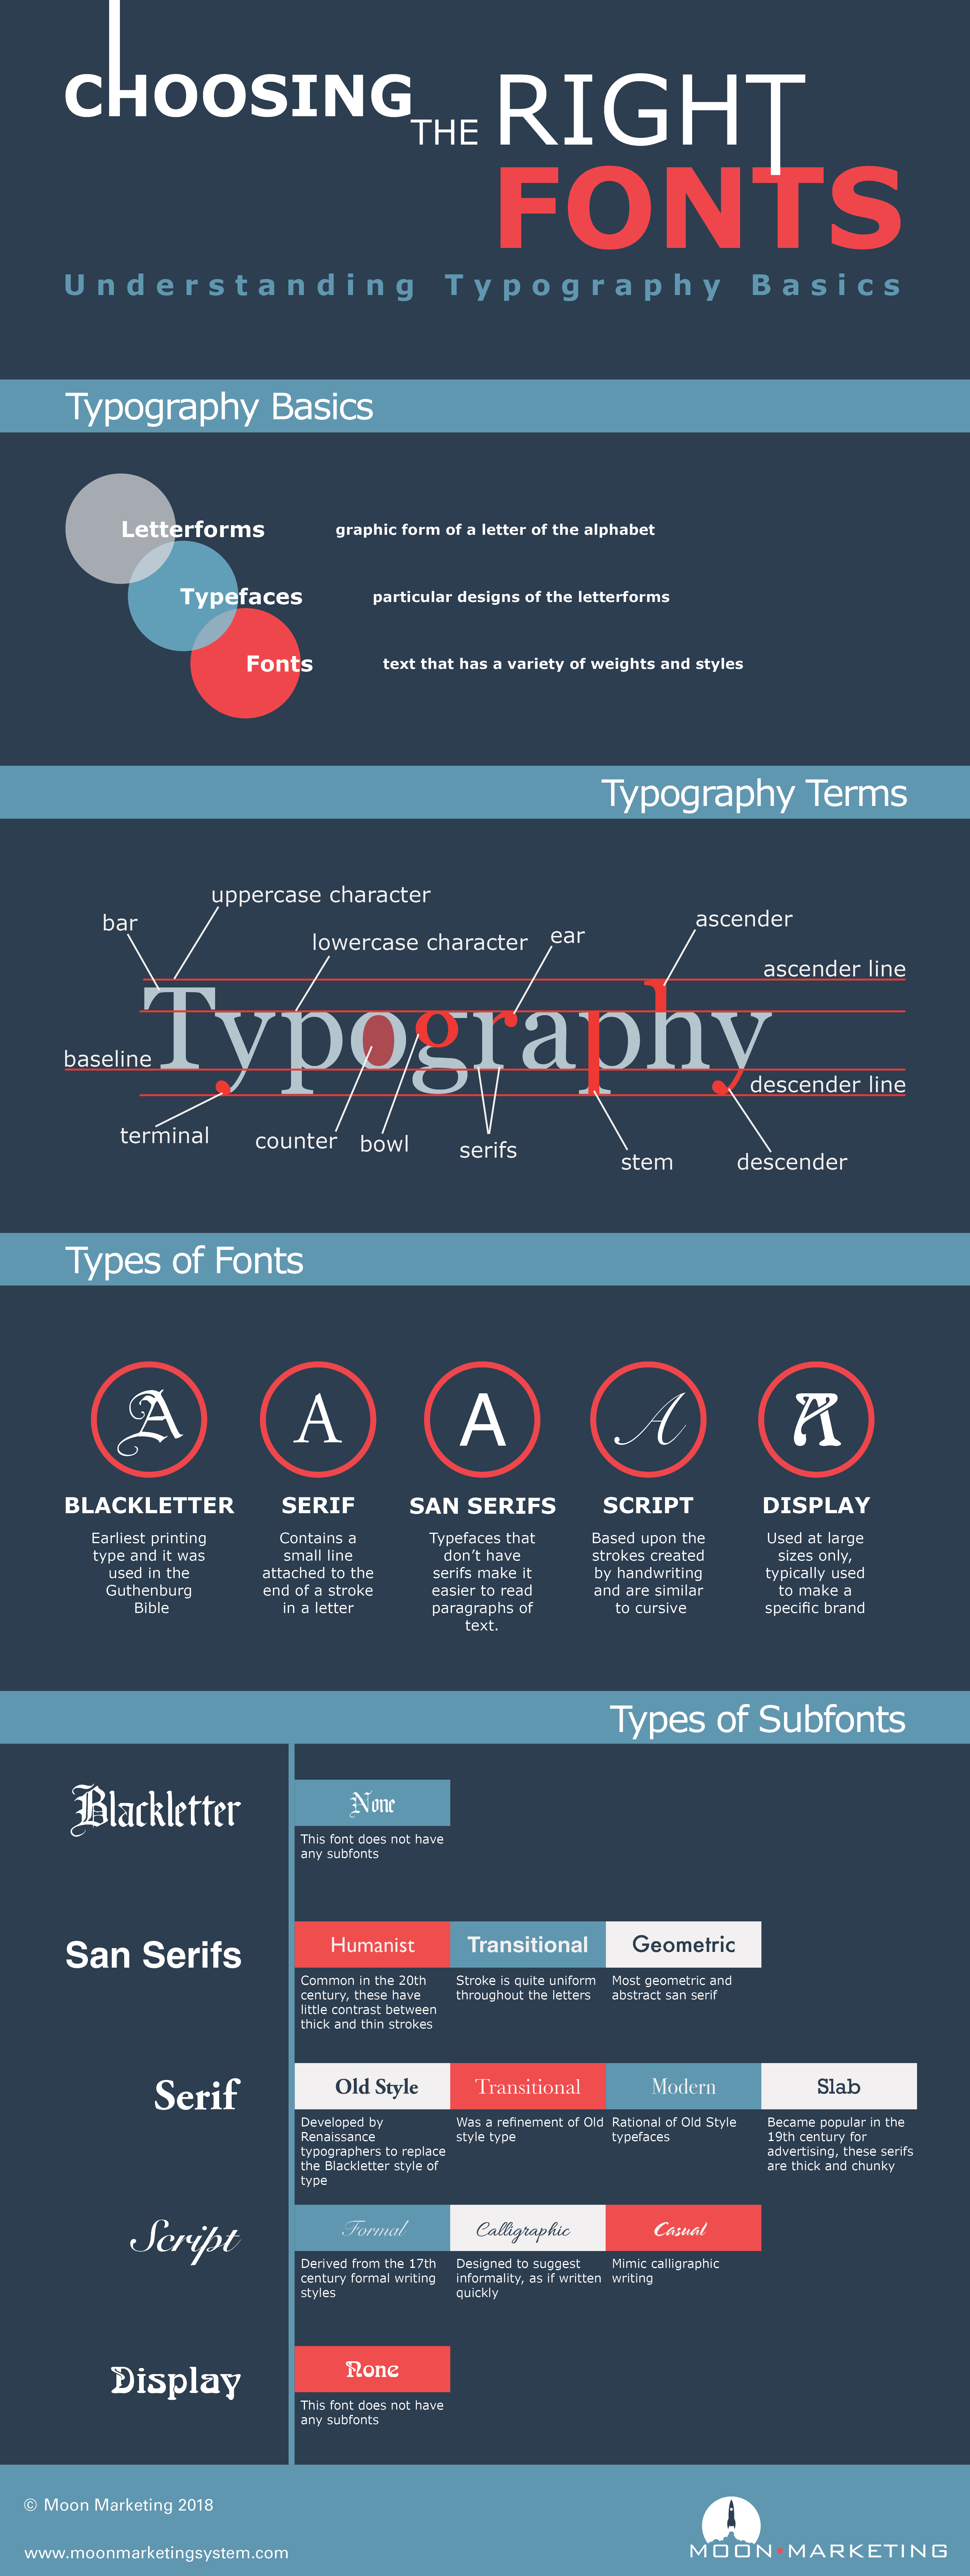 Choosing the Right Font: The Basics of Typography [Infographic]